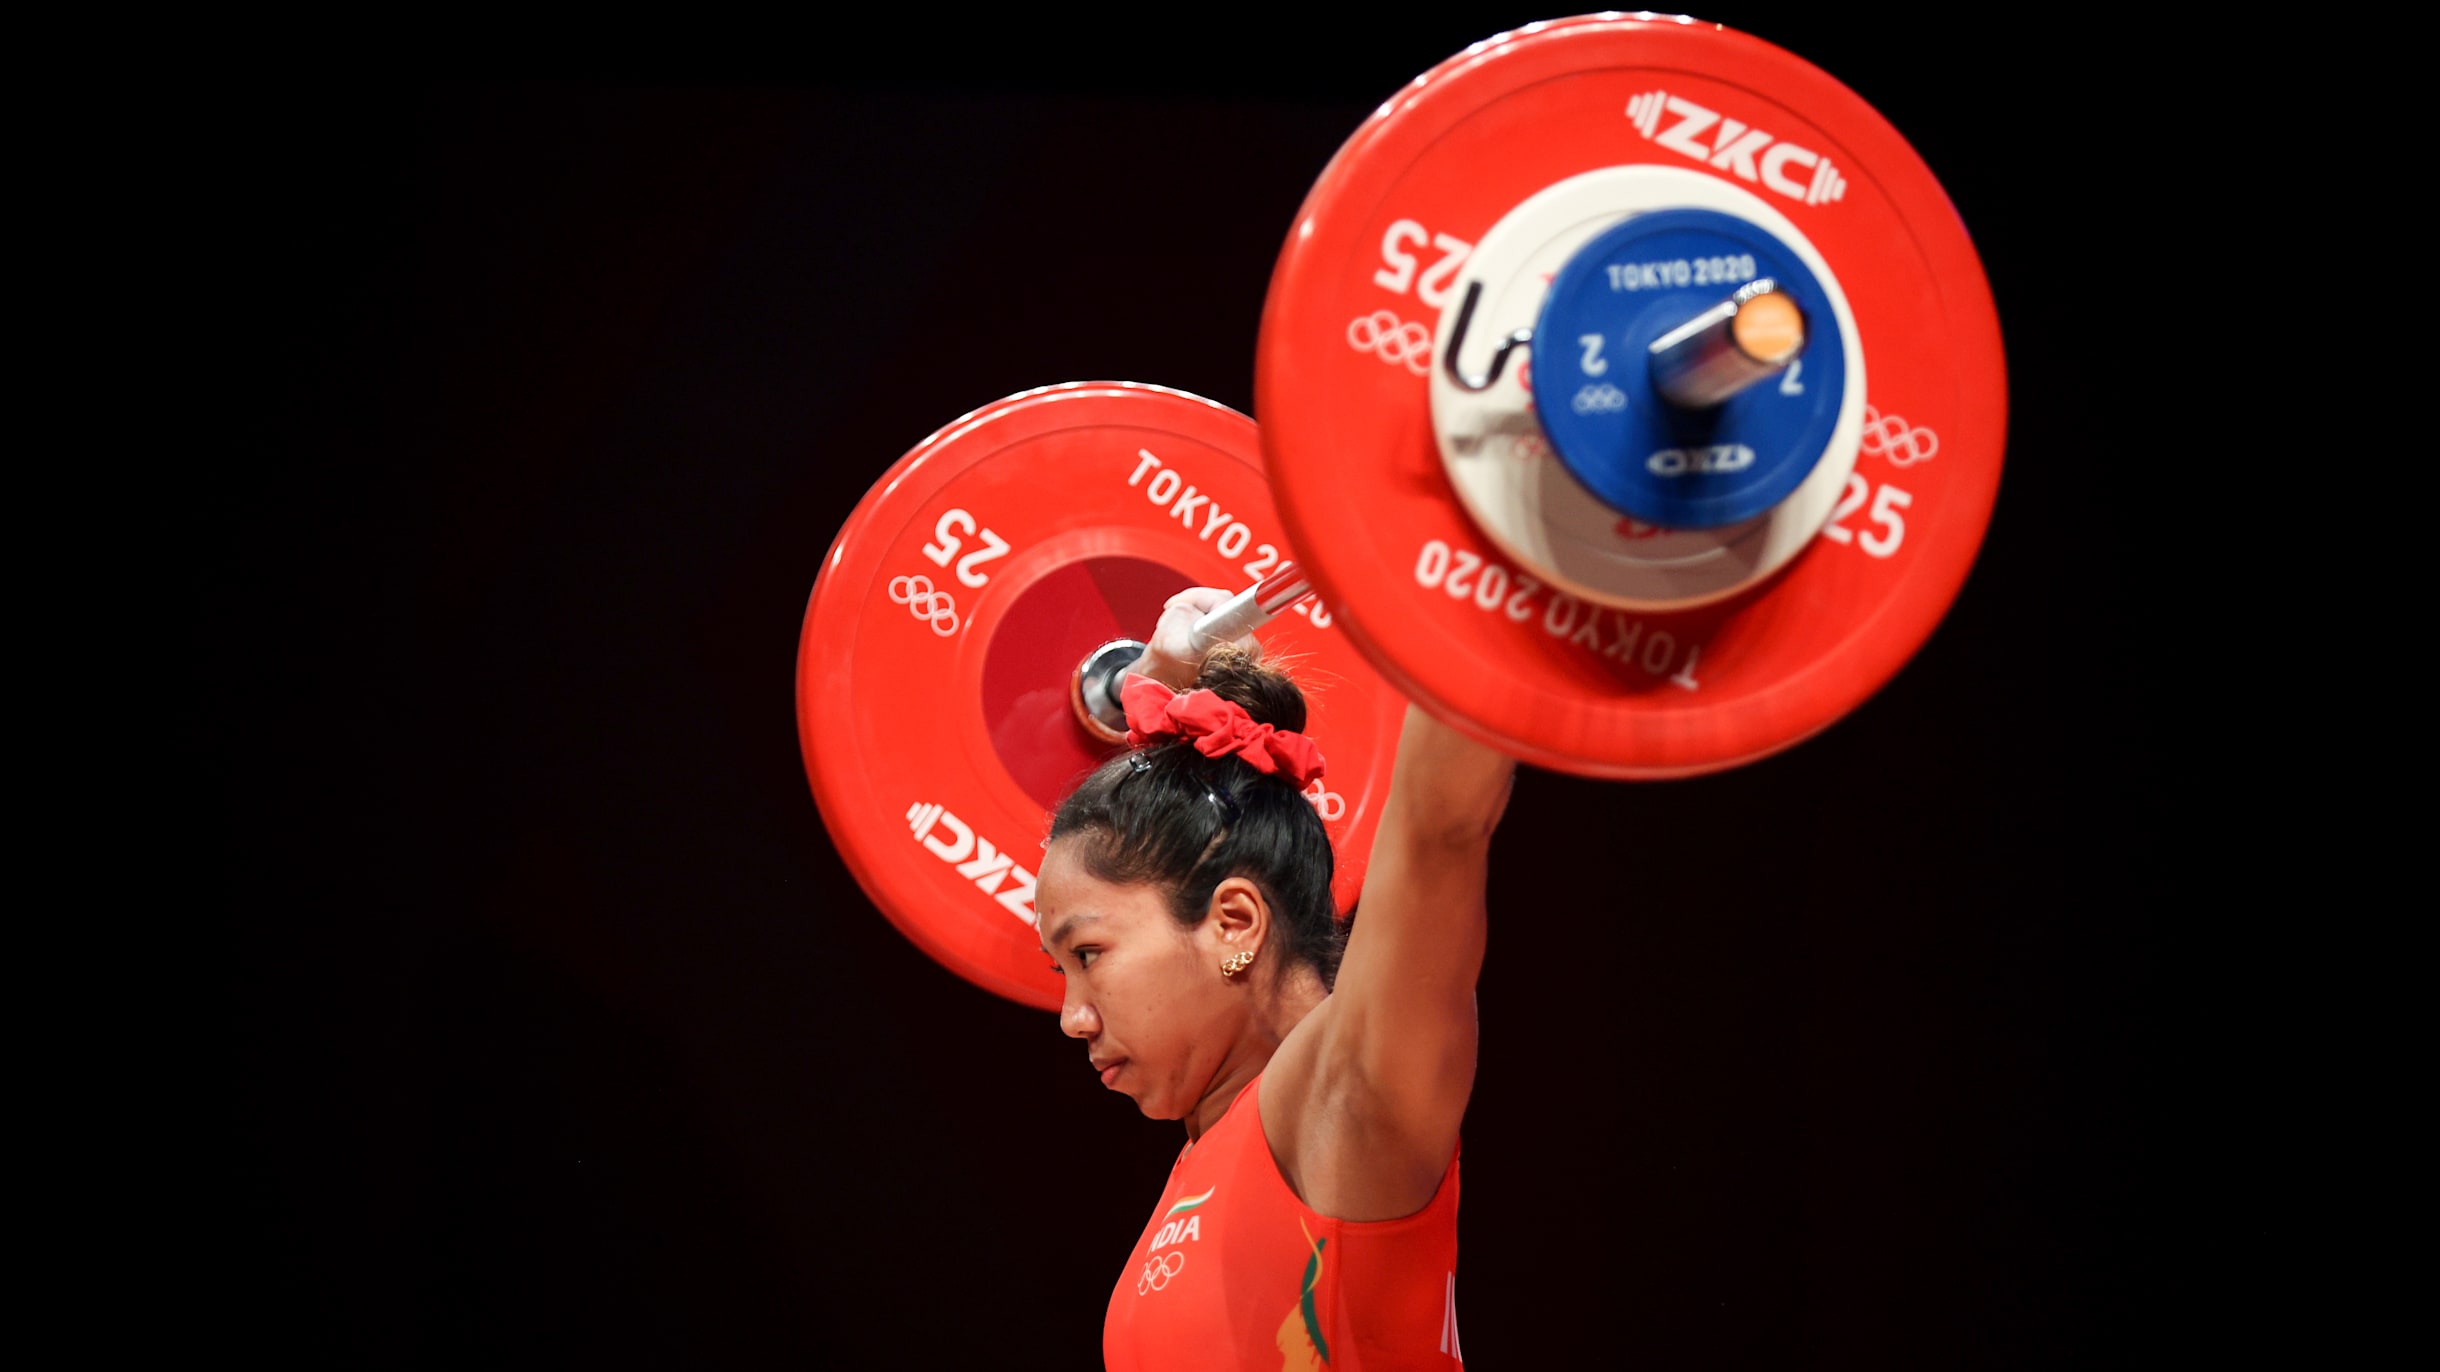 olympic weightlifting live stream free